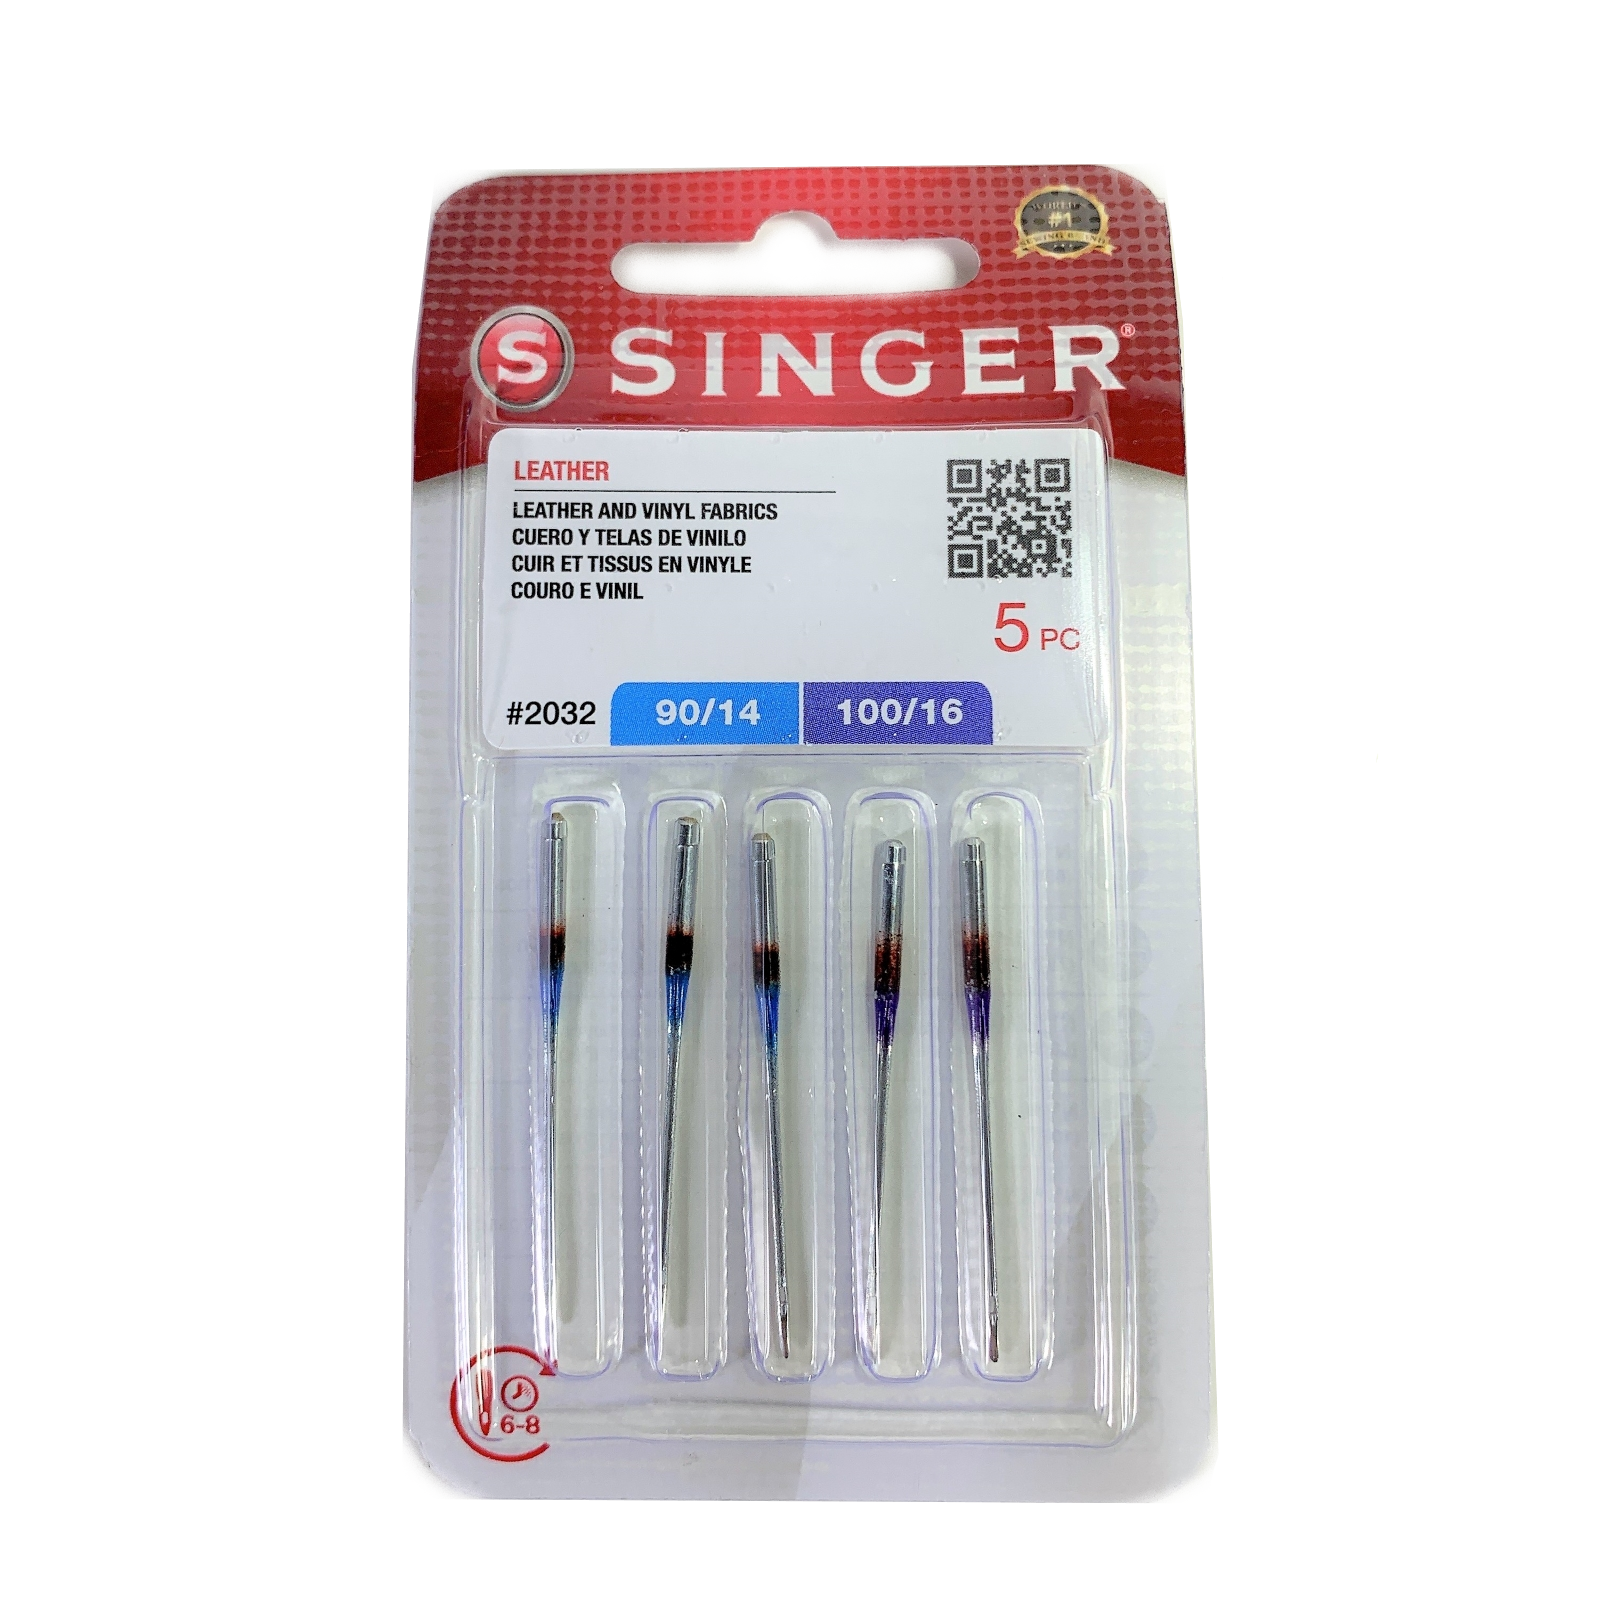 Vintage Curved Singer Sewing Machine Needles, 10 Needles, Choose your size